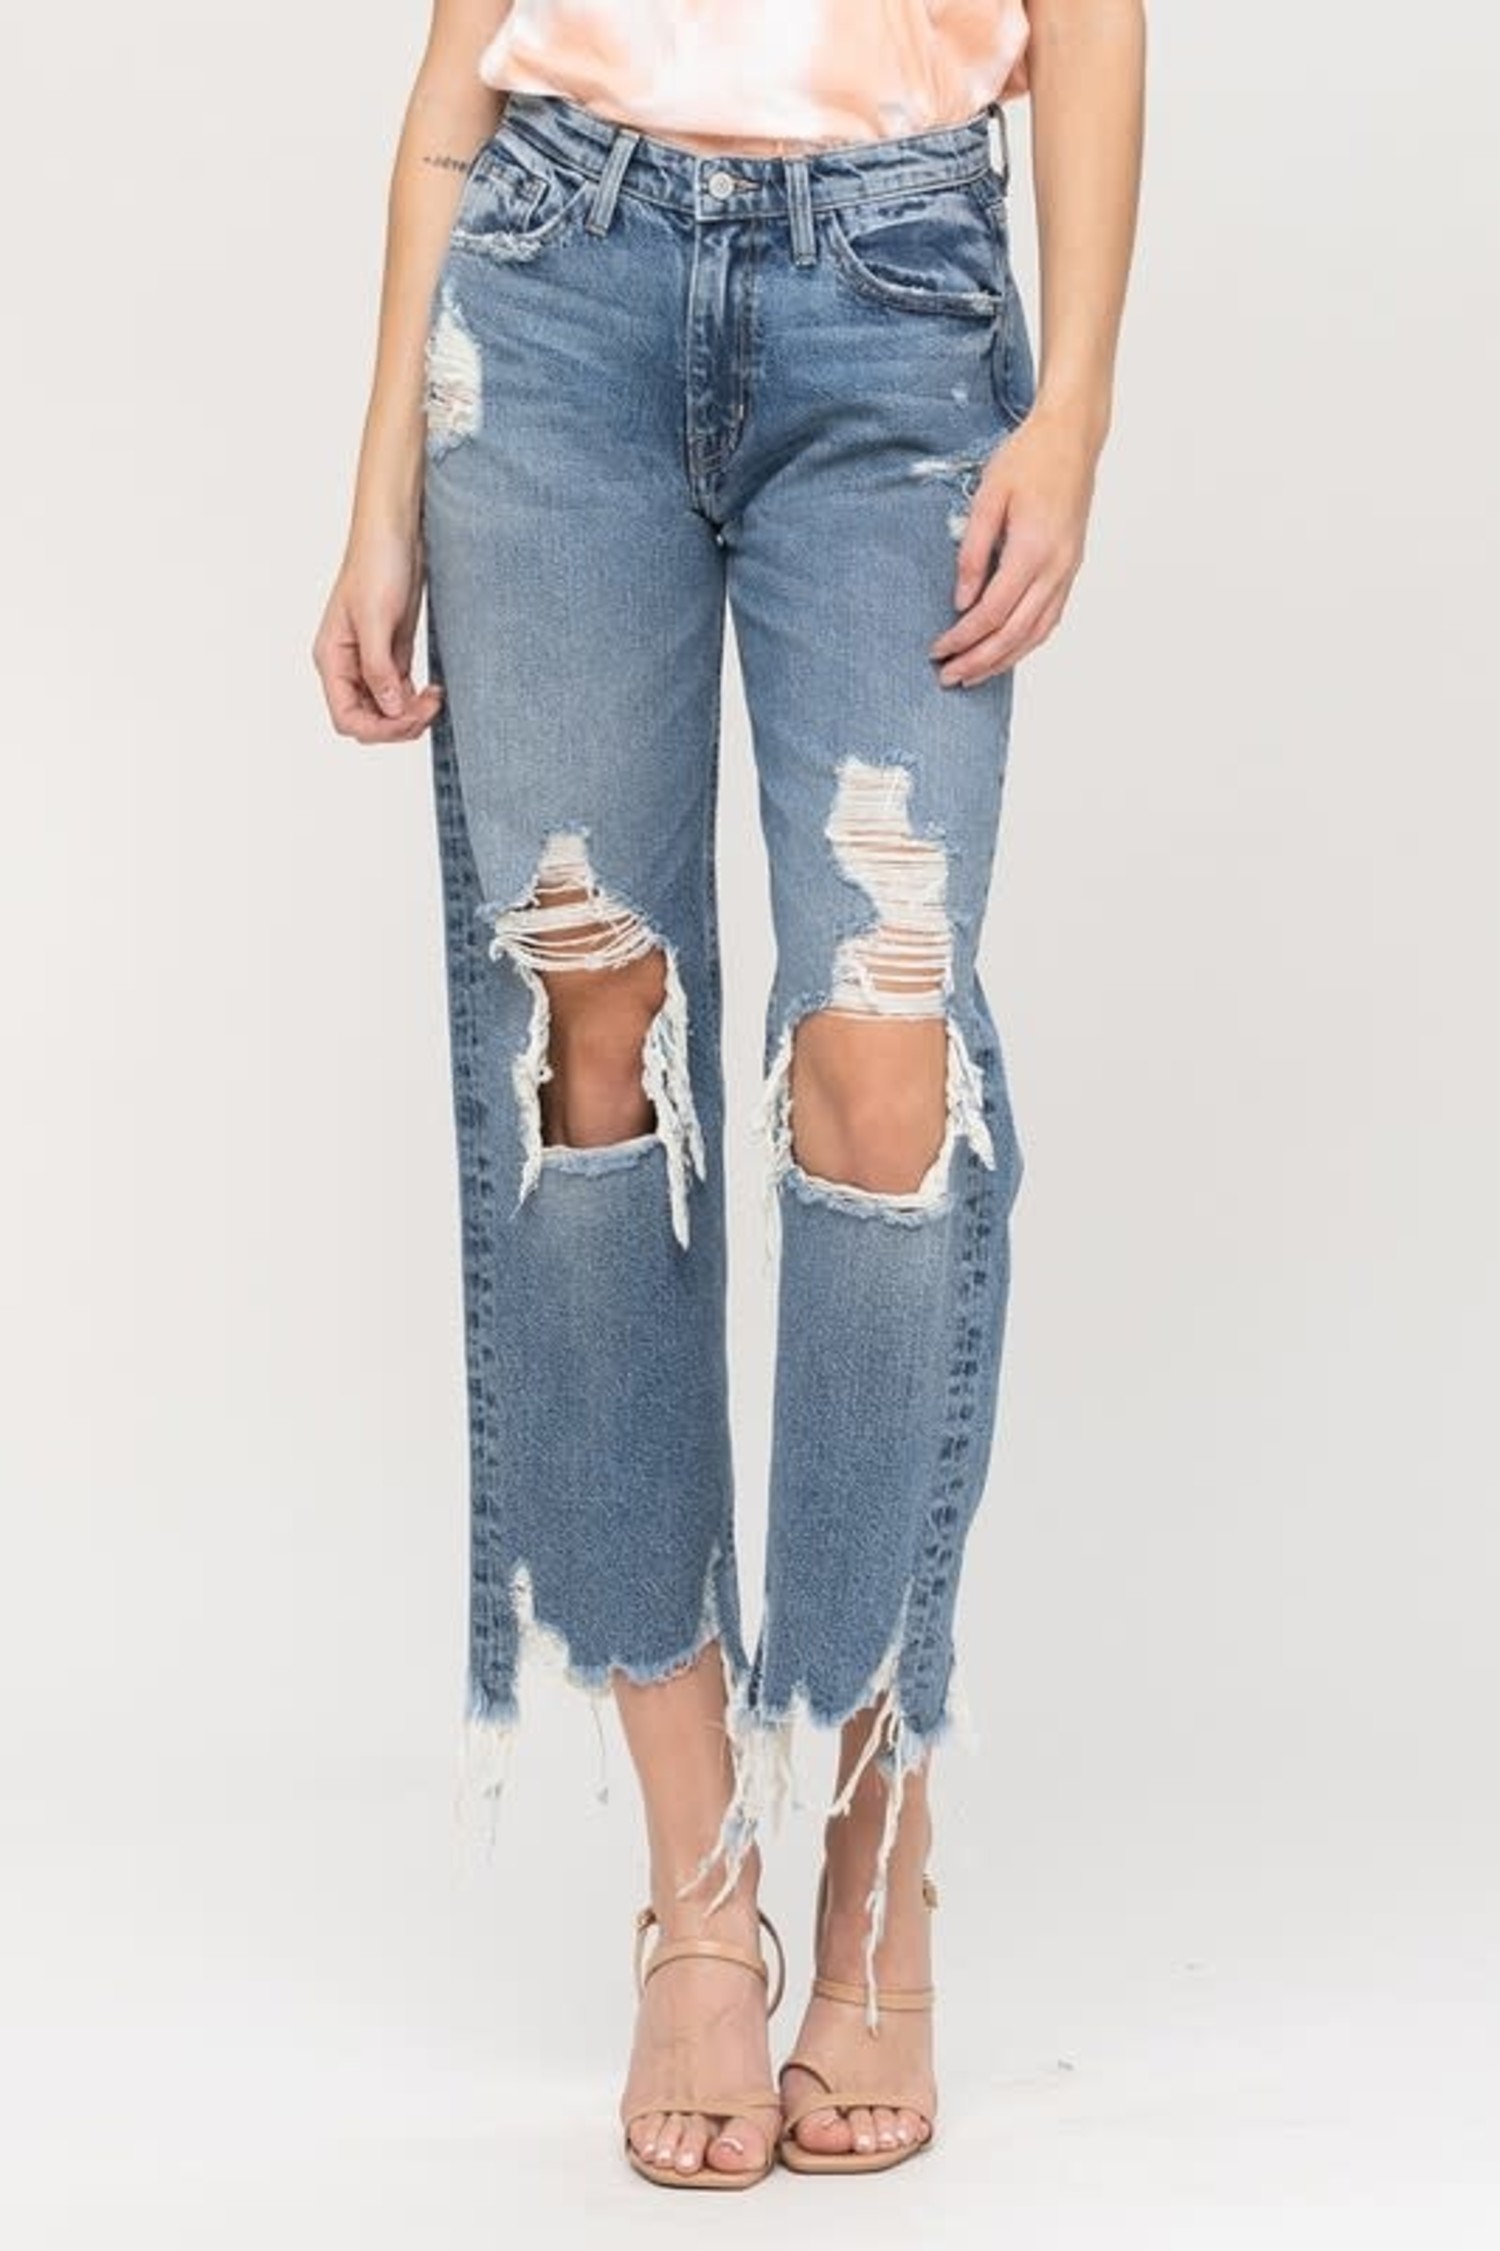 tattered high waisted jeans